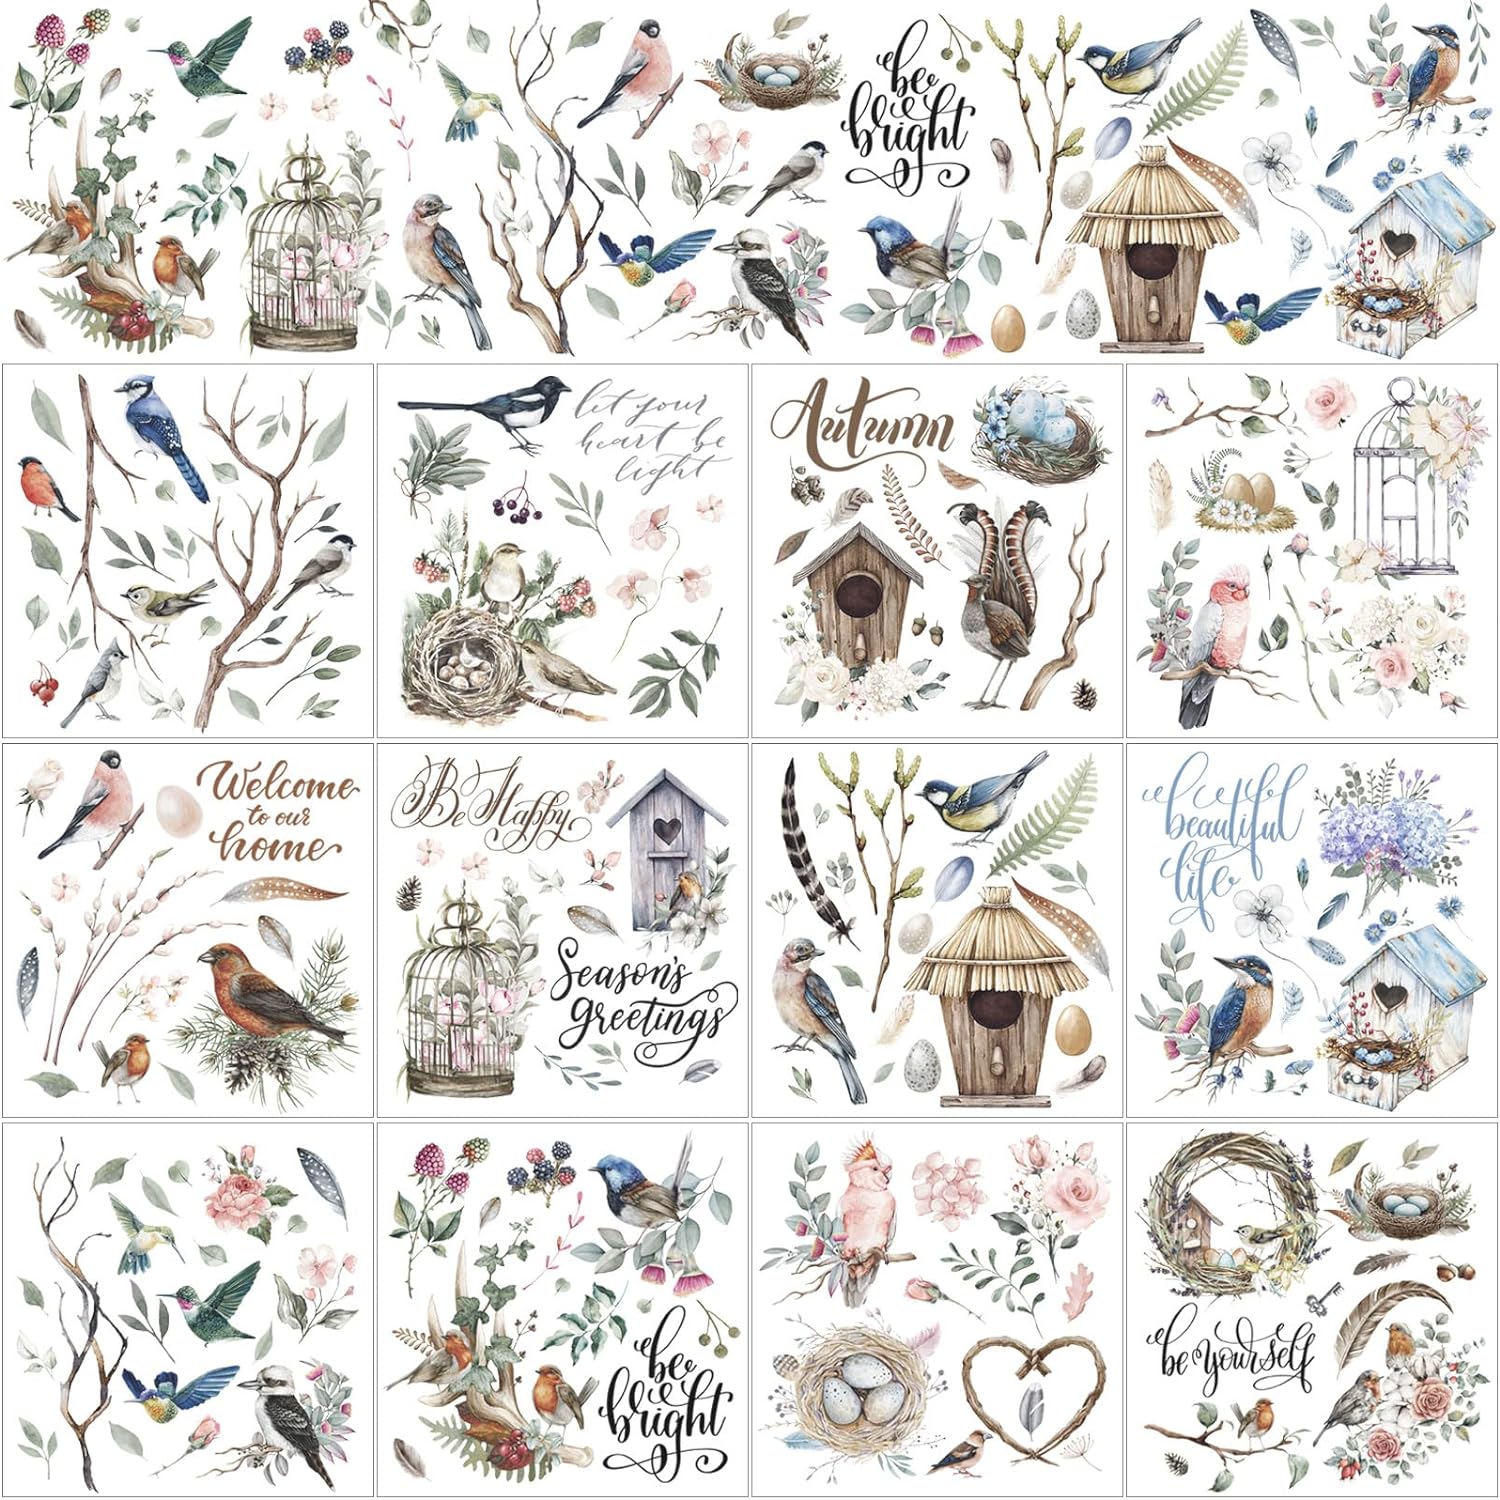 BBTO 12 Sheets Rub on Transfers for Crafts and Furniture Rub on Transfer Stickers Rub on Decals for Wood DIY Paper Home Decor, 5.5 x 5.7 Inch(Bird)